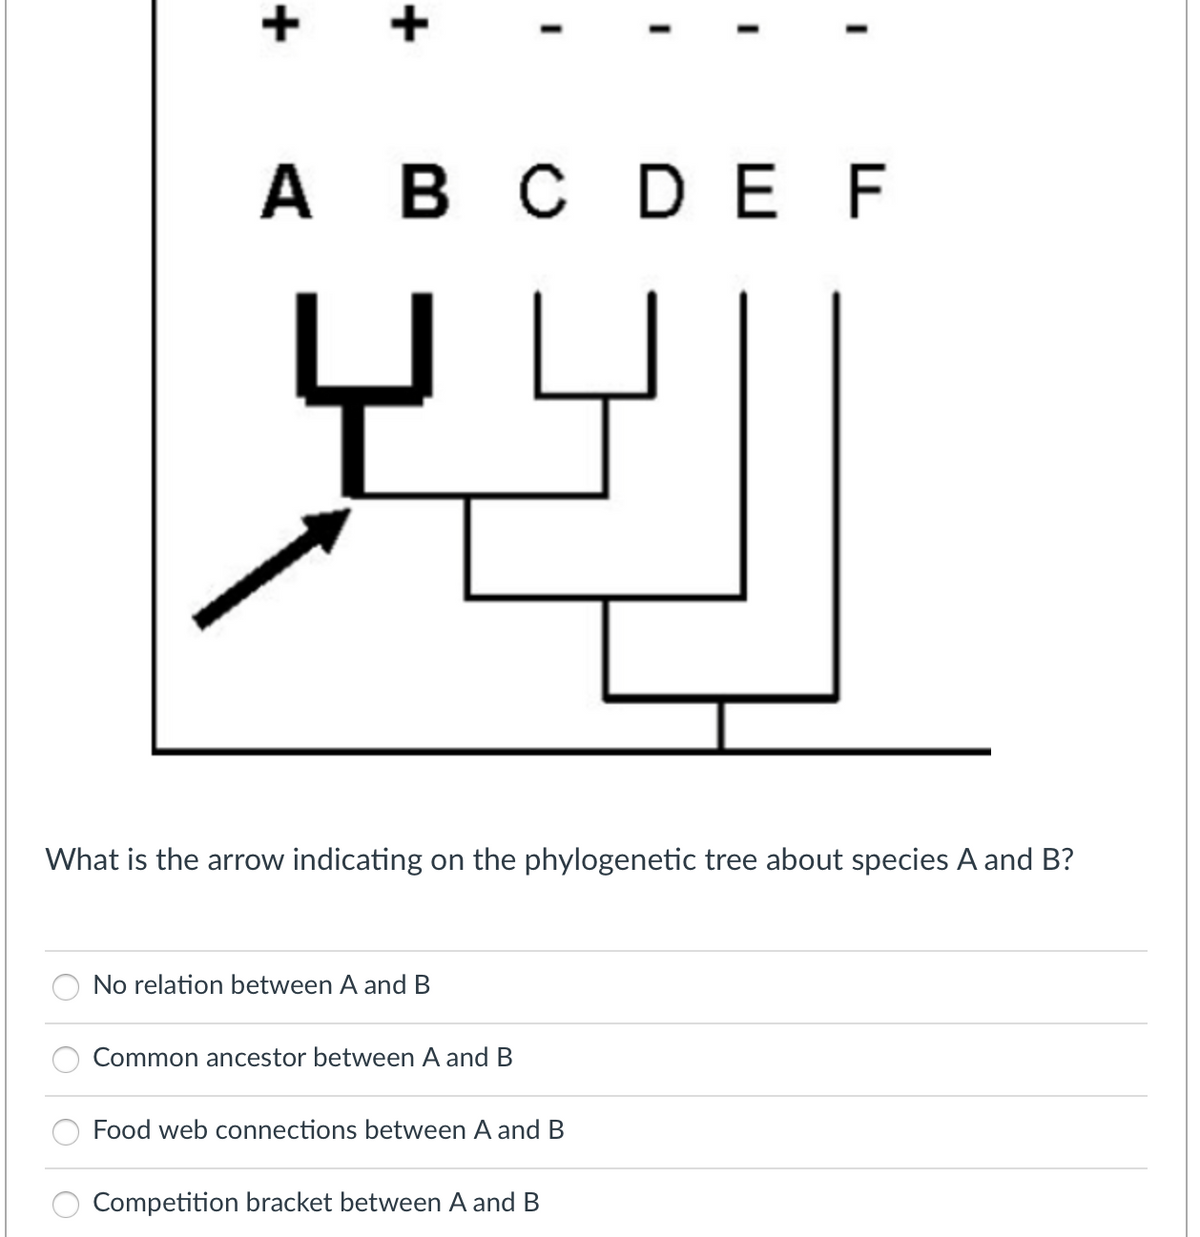 What is the arrow indicating on the phylogenetic tree about species A and B?
O
A B C D E F
oo
No relation between A and B
Common ancestor between A and B
Food web connections between A and B
Competition bracket between A and B